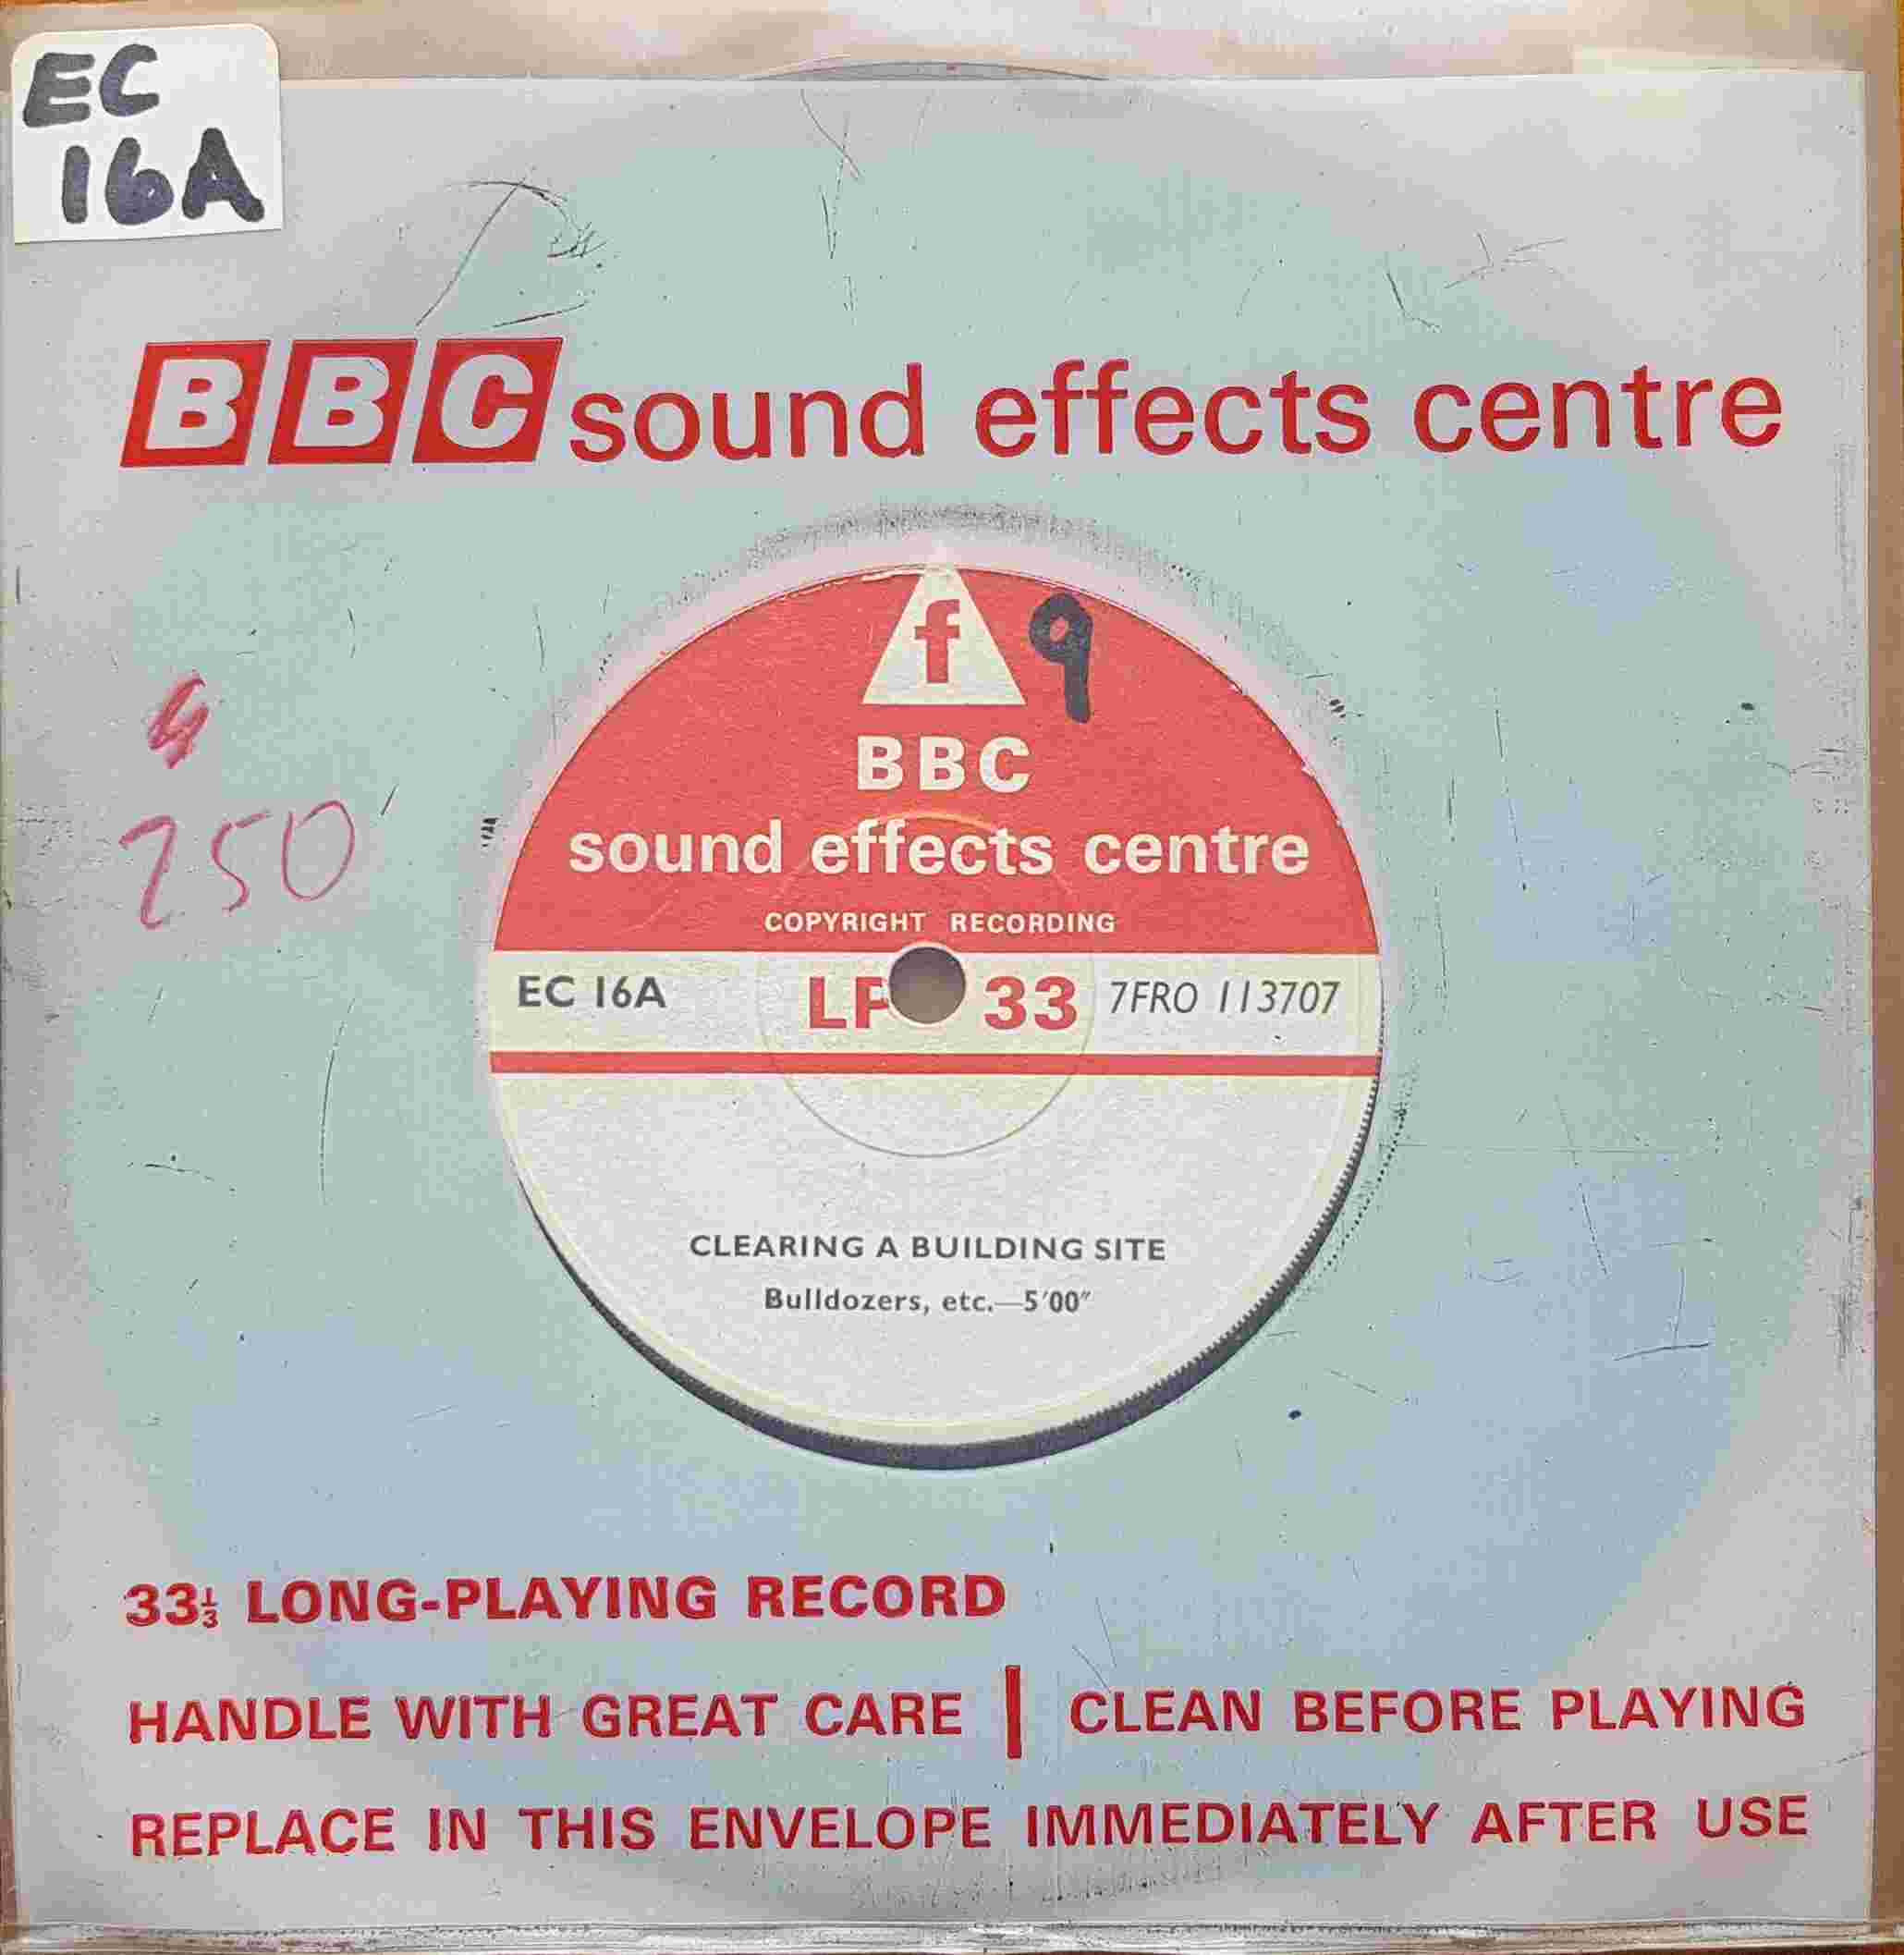 Picture of EC 16A Clearing a building site by artist Not registered from the BBC singles - Records and Tapes library